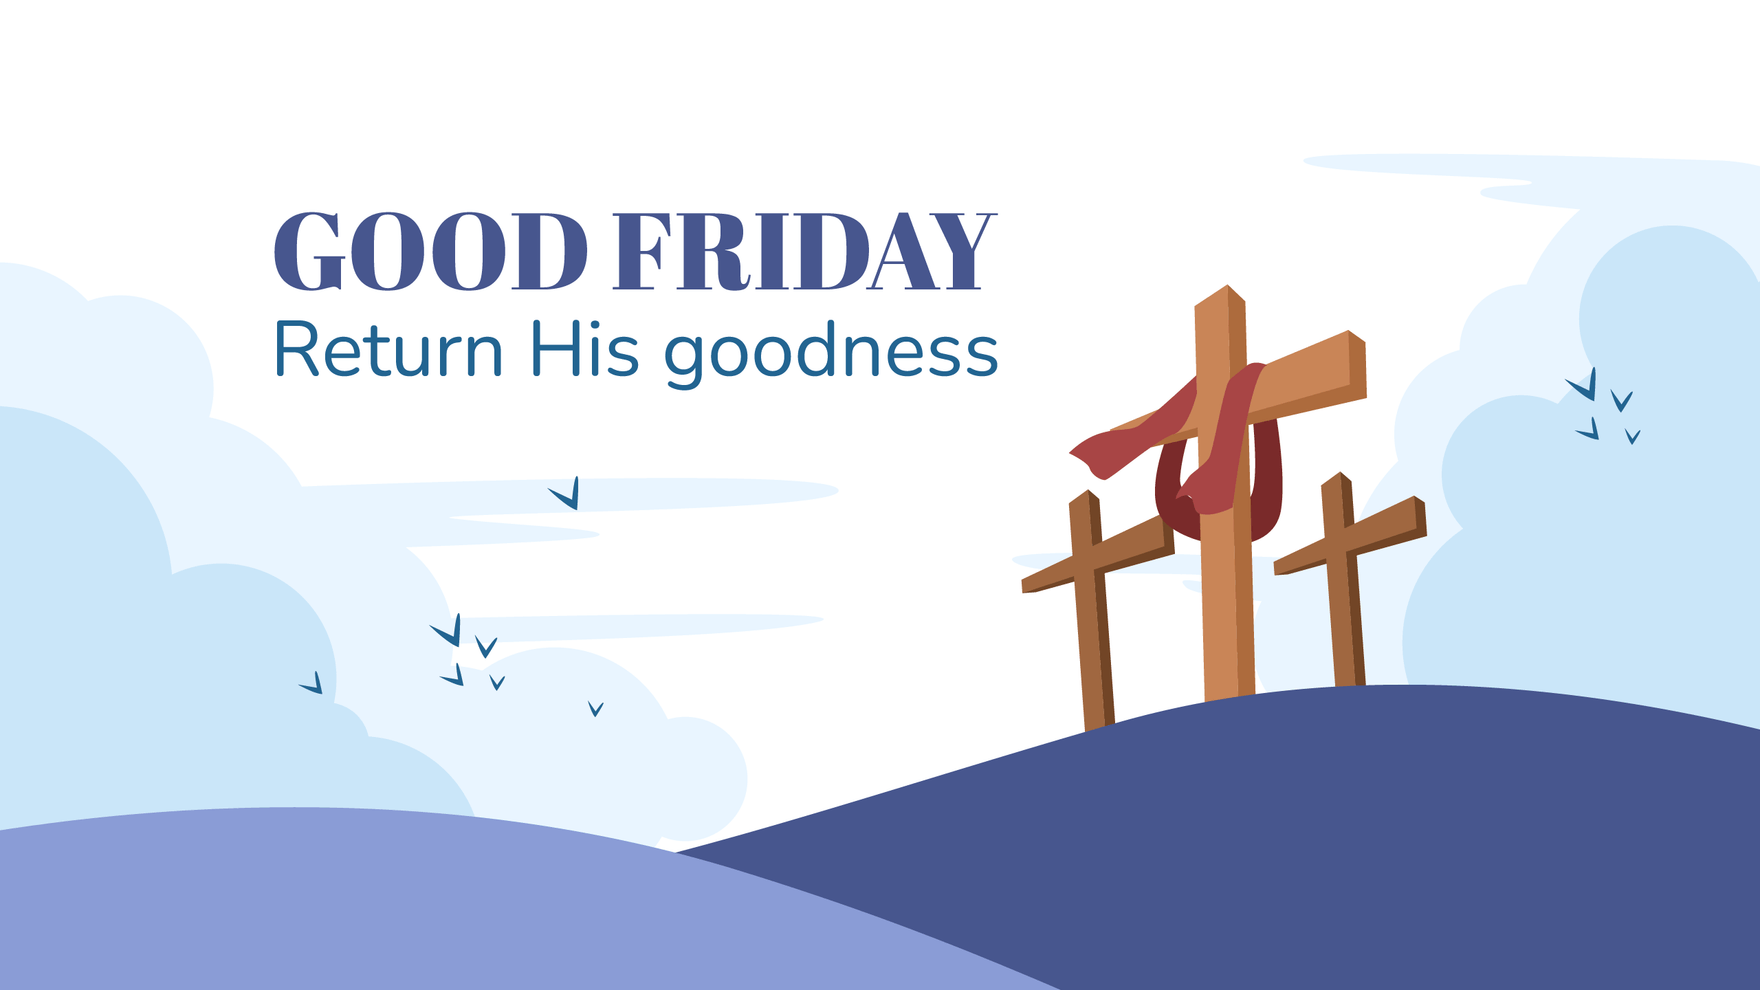 Free Good Friday Youtube Cover in Illustrator, PSD, EPS, SVG, JPG, PNG